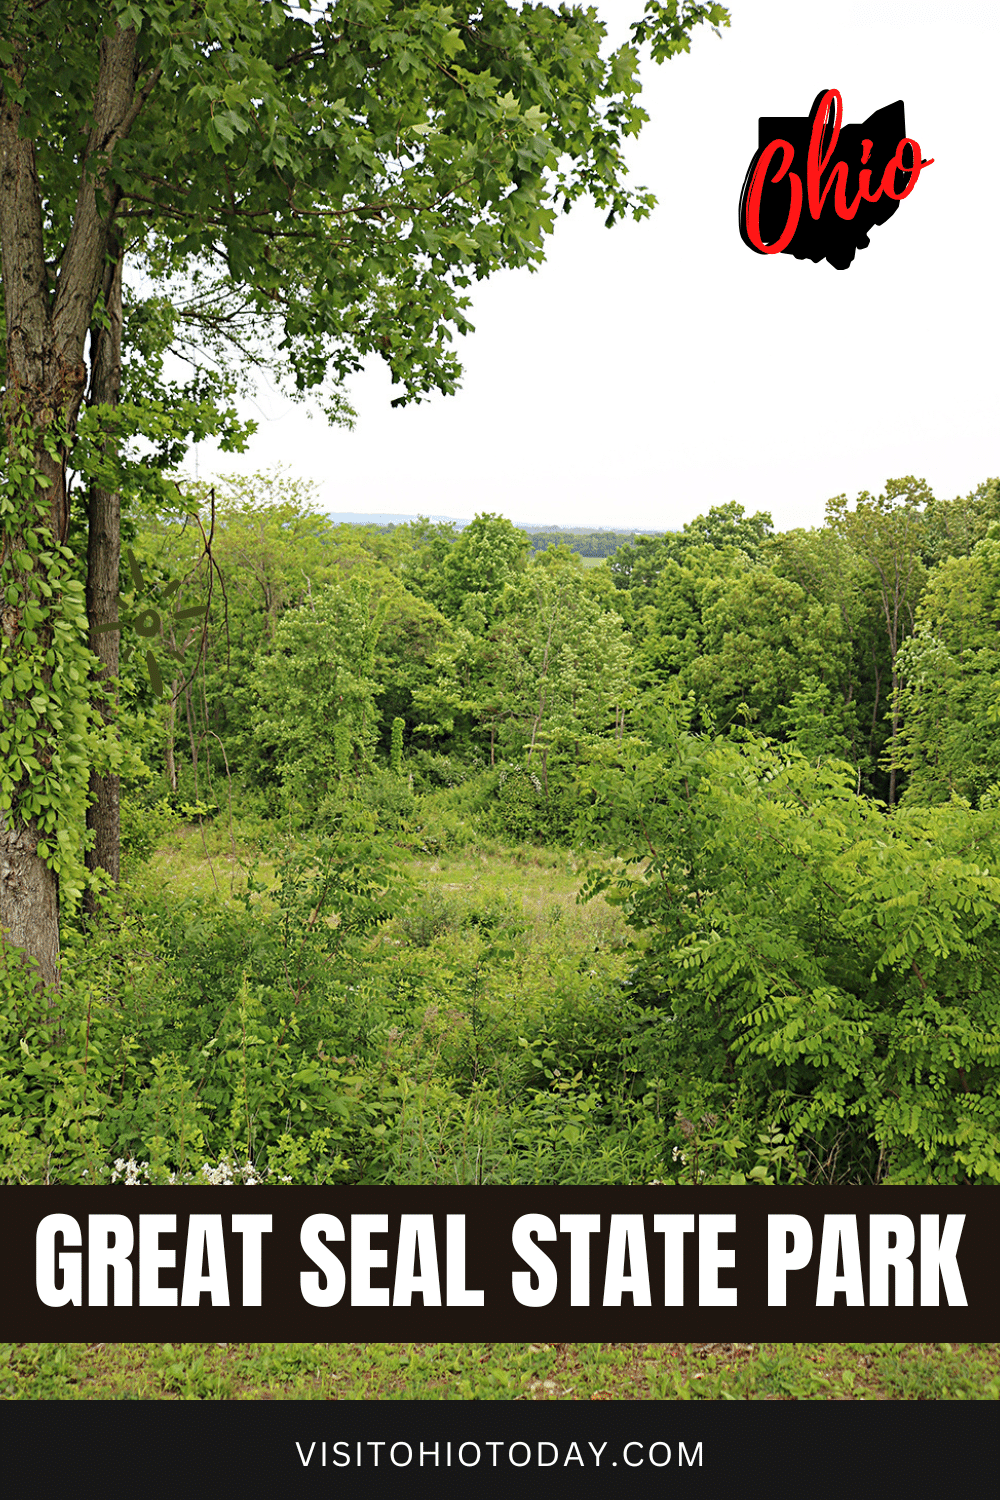 Great Seal State Park is a 1682 acre park located in Southern Ohio. It is filled with beautiful scenery, hiking trails, a campground and more! #statepark #ohio #ohiopark #hiking #greatsealstatepark